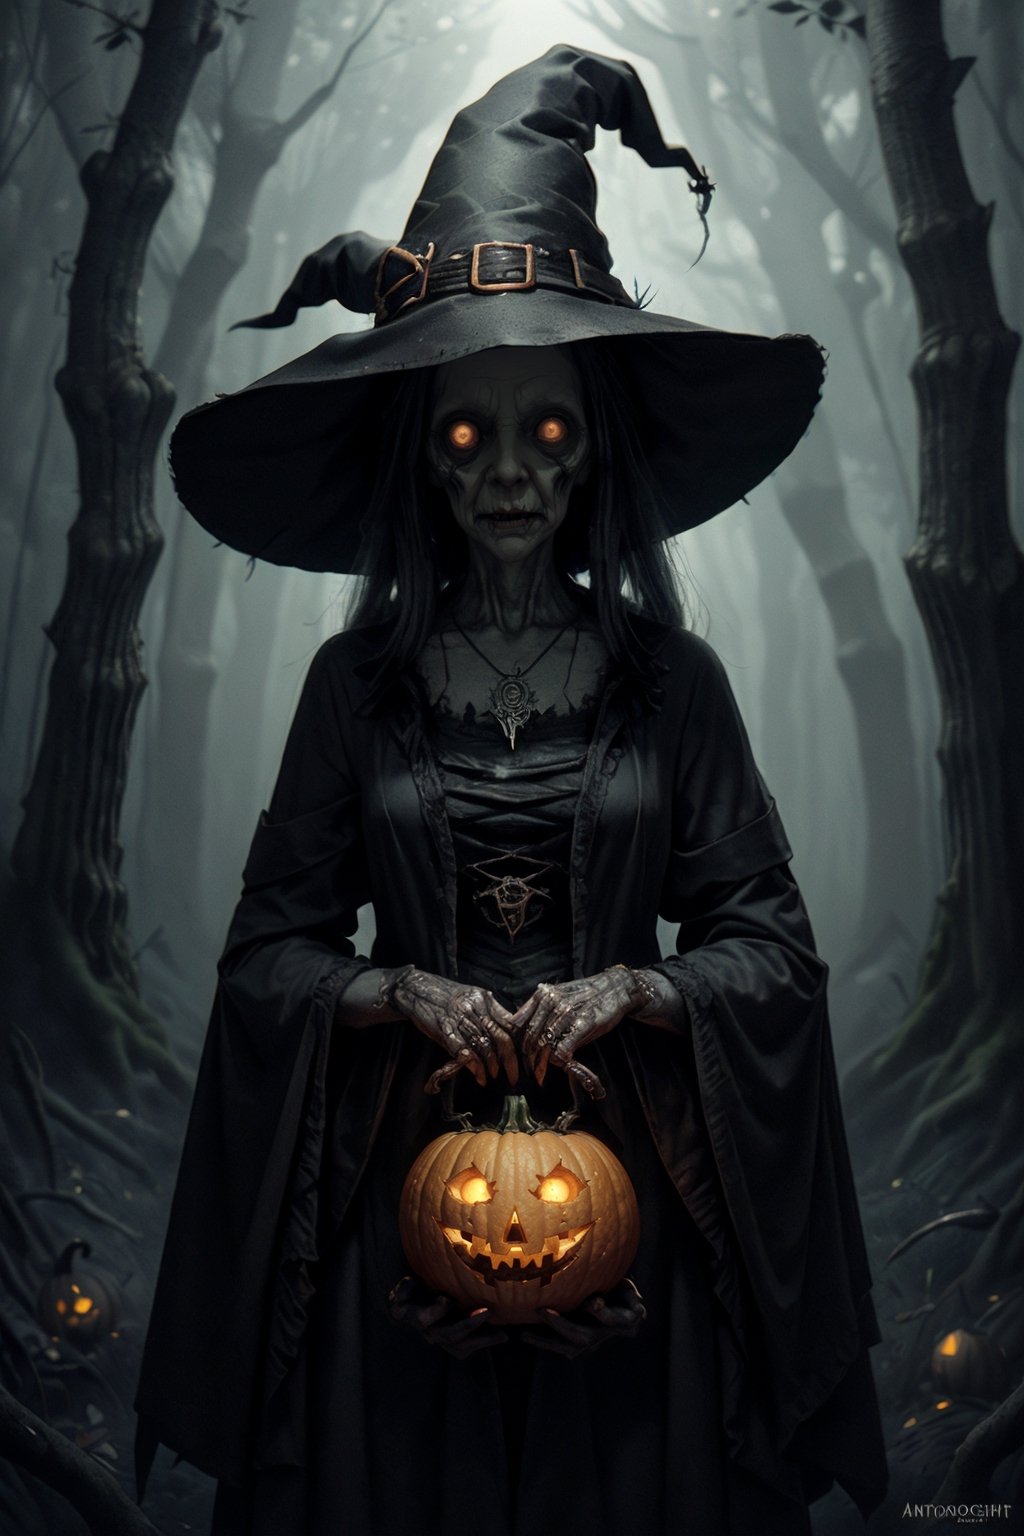 Best picture quality, n3n3k, looking at viewer, hat, witch hat, witch, black headwear, jewelry, necklace,rim light,,mysterious forest, anthropomorphic tree spirit, holding a pumpkin lantern, following a floating, cute little ghost, full of details,